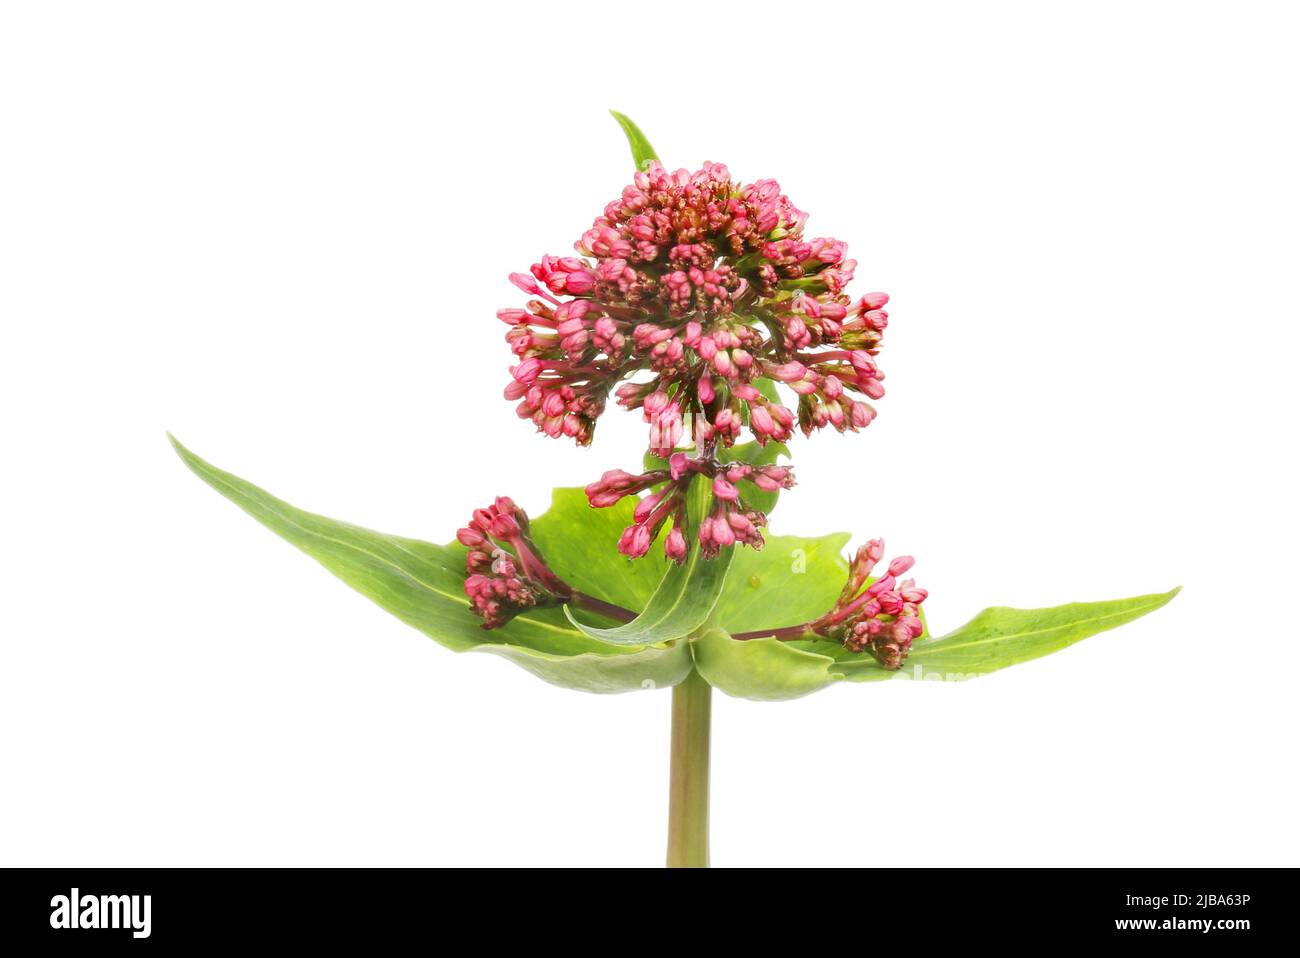 Red valerian, Centranthus ruber, flowers and foliage closeup Stock Photo